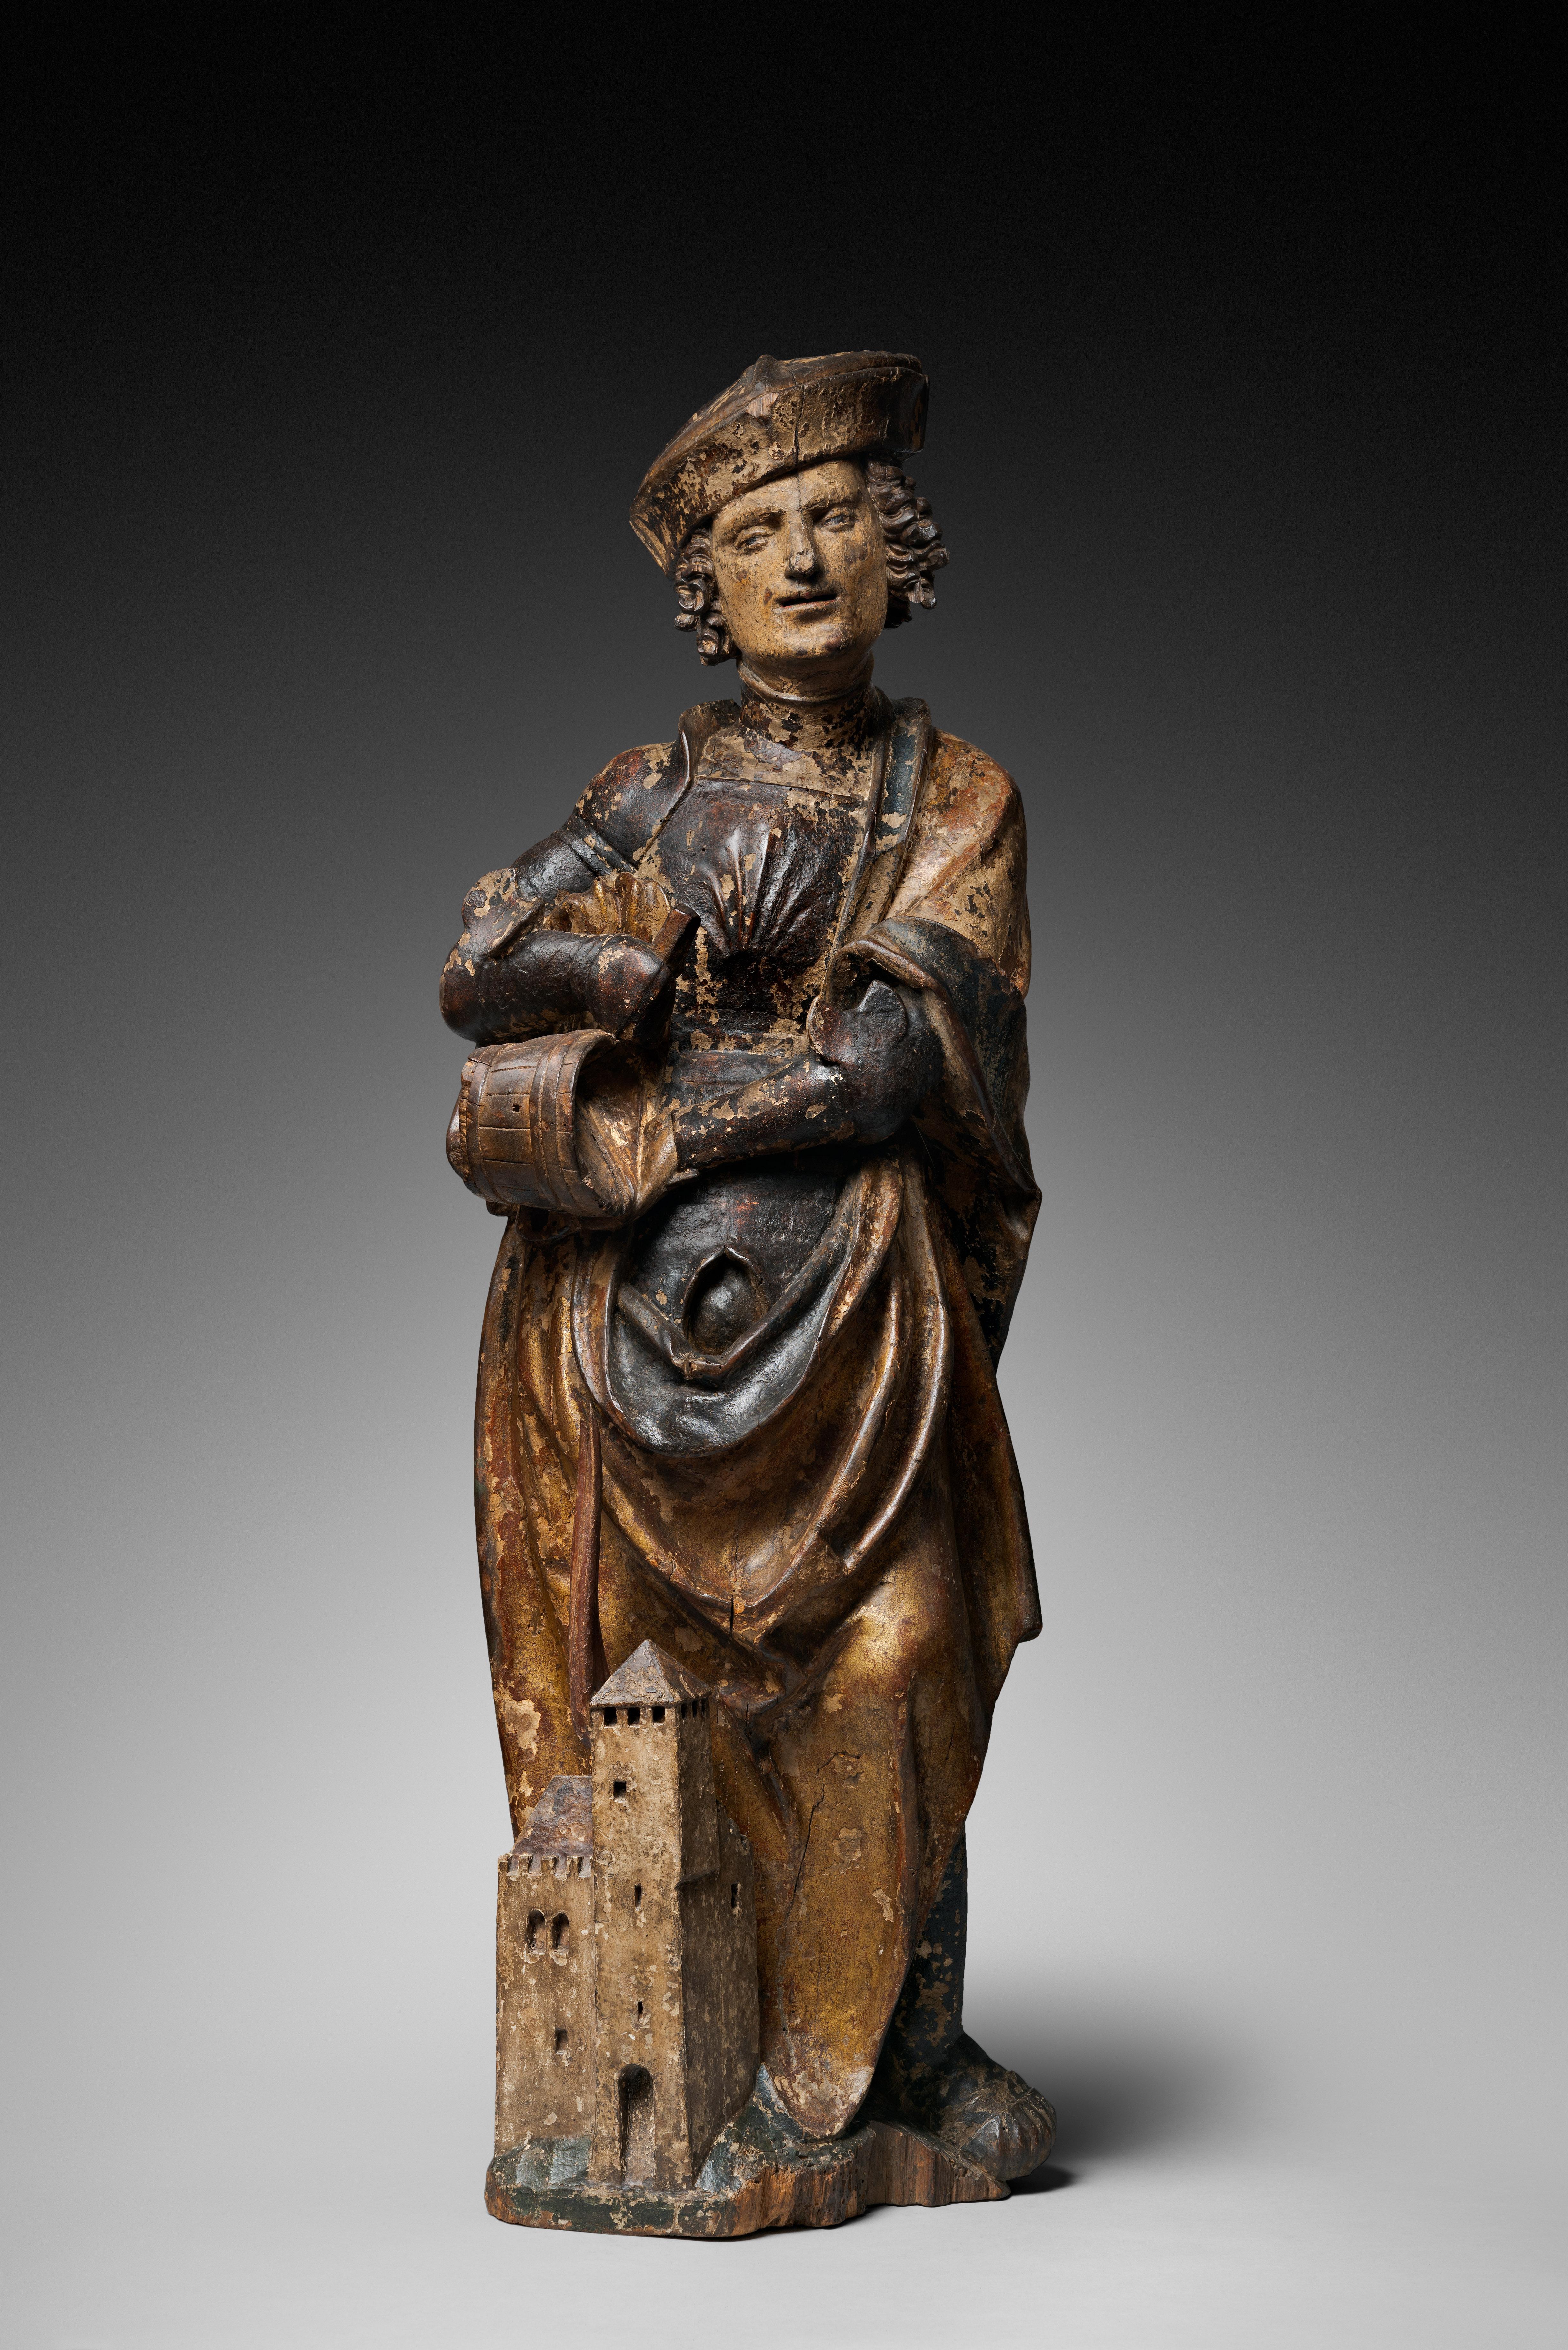 SAINT FLORIAN
 
ORIGIN: SOUTH GERMANY, SWABIA
PERIOD: END OF THE 15th CENTURY
 
Height : 100,5 cm
Width : 34 cm
Depth : 17 cm
 Polychromed lime wood
Good state of conservation
 
 Since the Middle Ages, Saint Florian has been the object of an